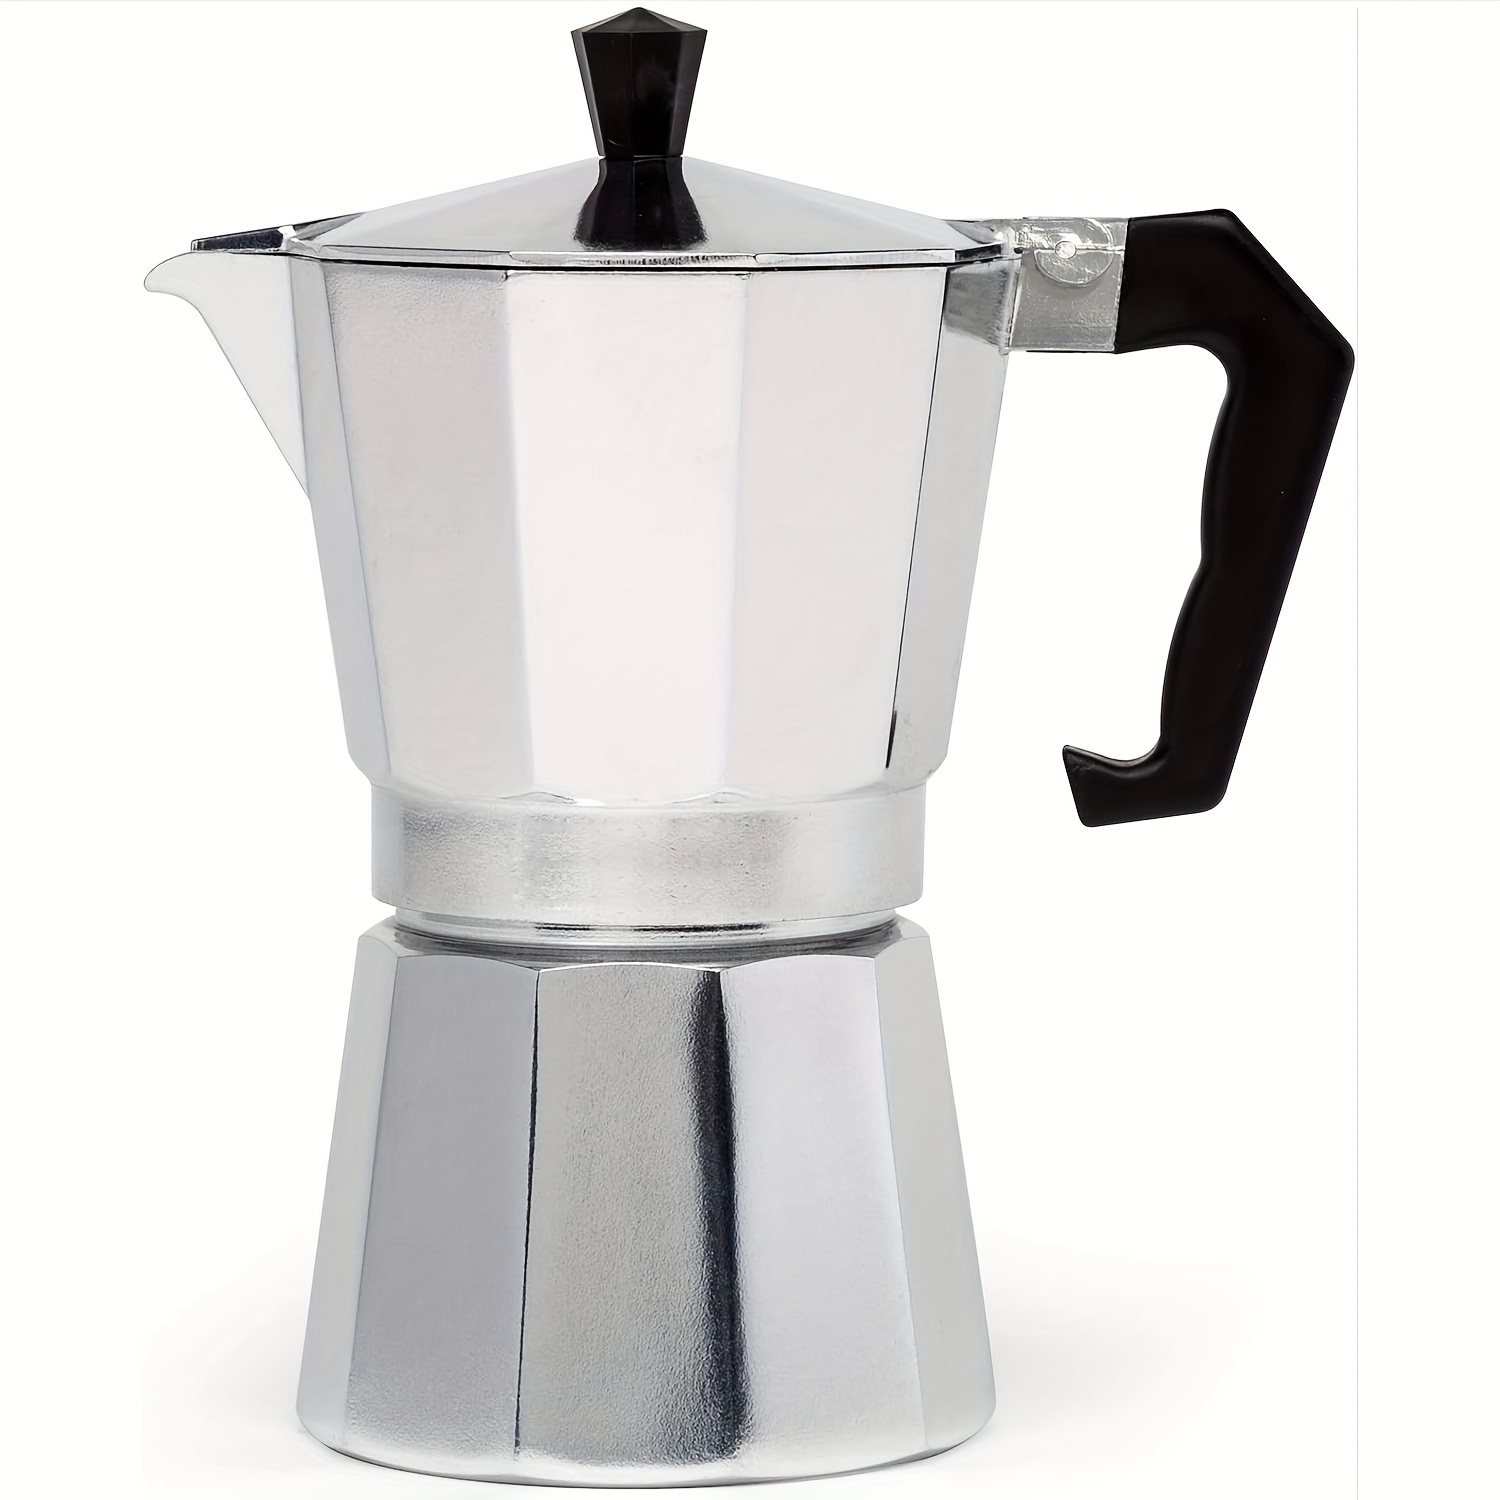 Bincoo 120ML/2 Cup Stovetop Espresso Maker Double Valve Moka Pot with  Thermostat Extractor,Italian Espresso Moka Pot Italian Espresso Moka Pot  for